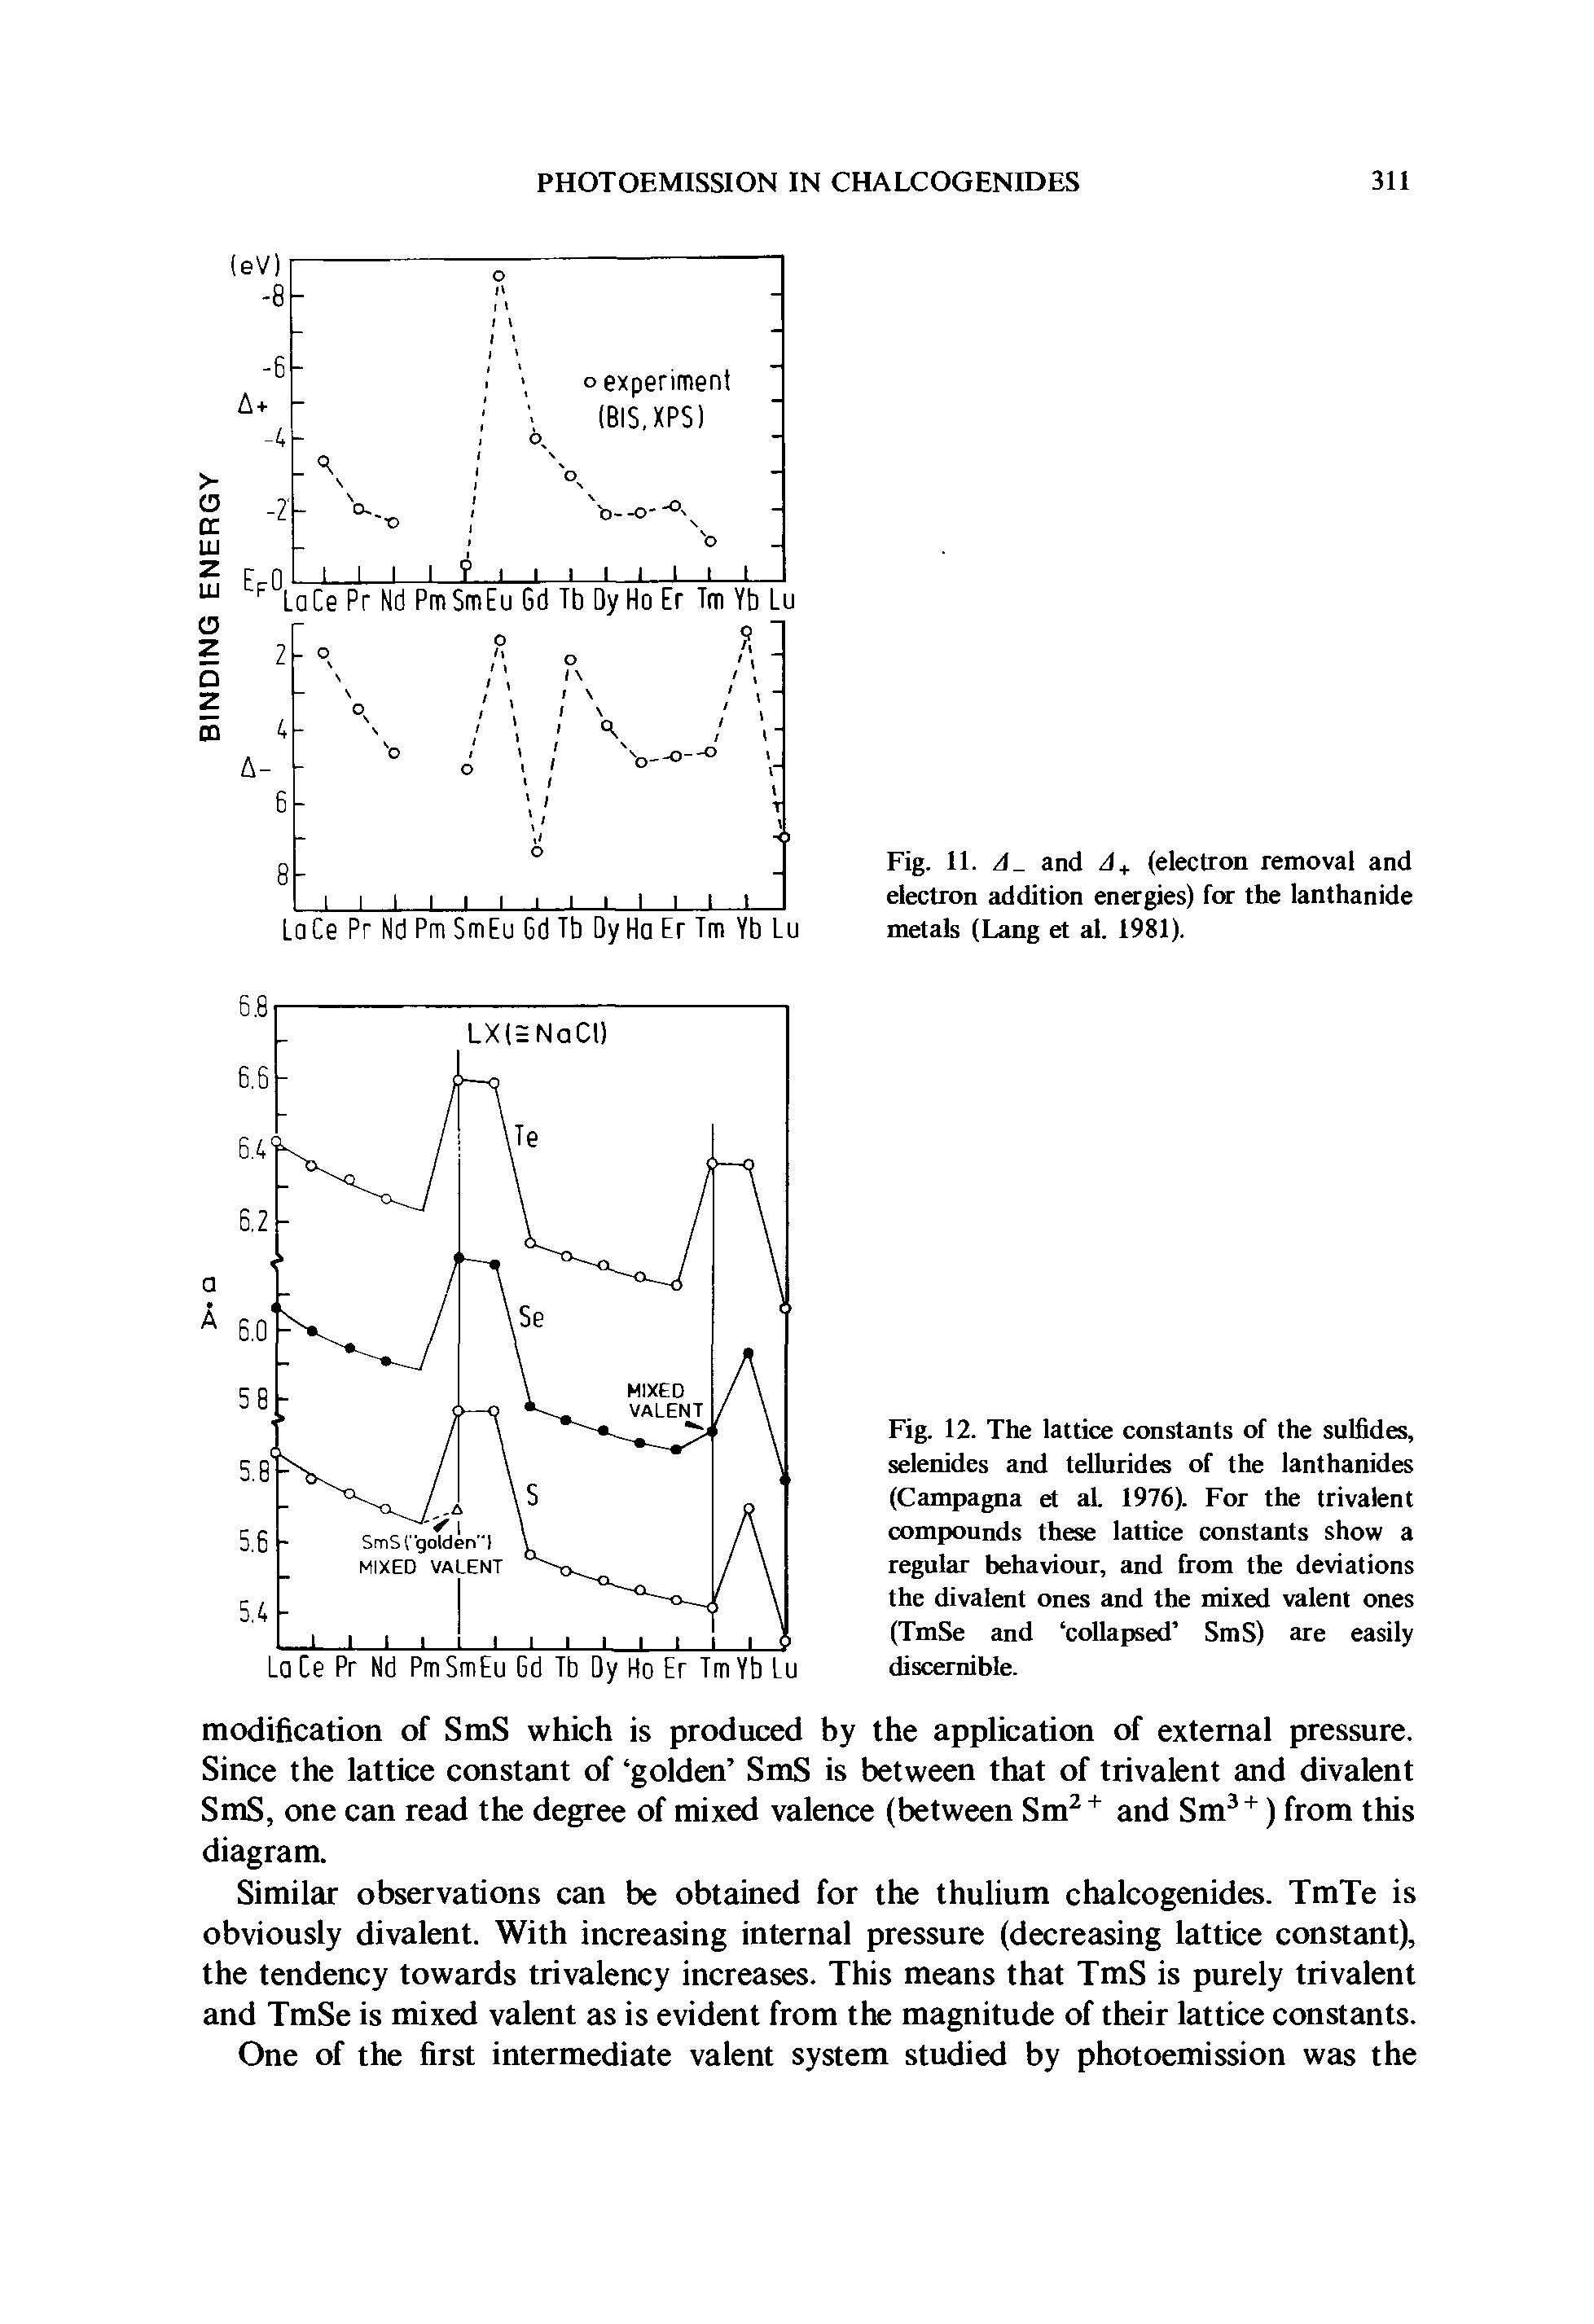 Fig. 11. A and (electron removal and electron addition energies) for the lanthanide metals (Lang et al. 1981).